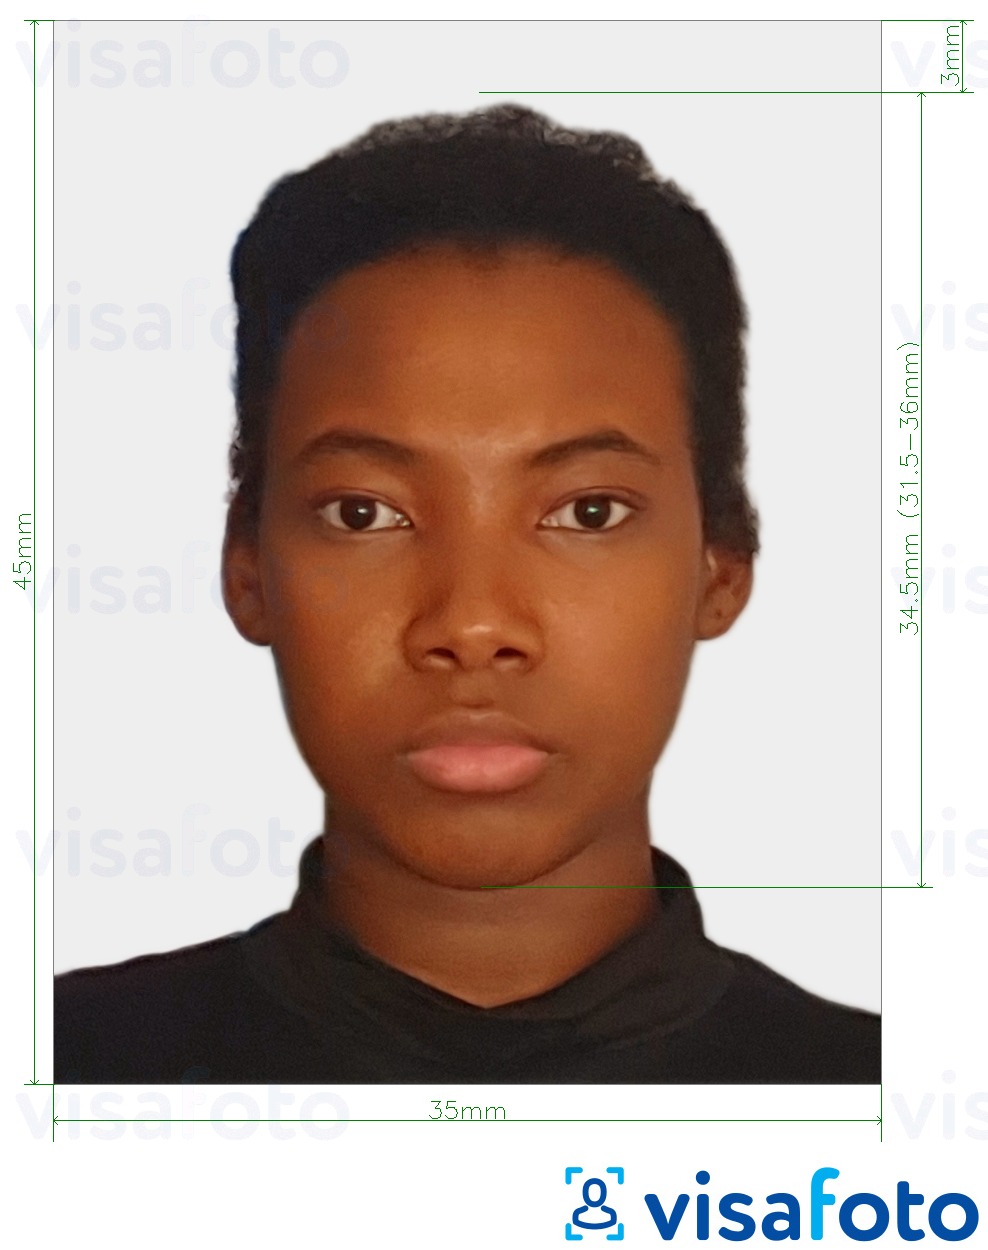 Example of photo for Suriname passport 45x35 mm (1.77x1.37 inch) with exact size specification